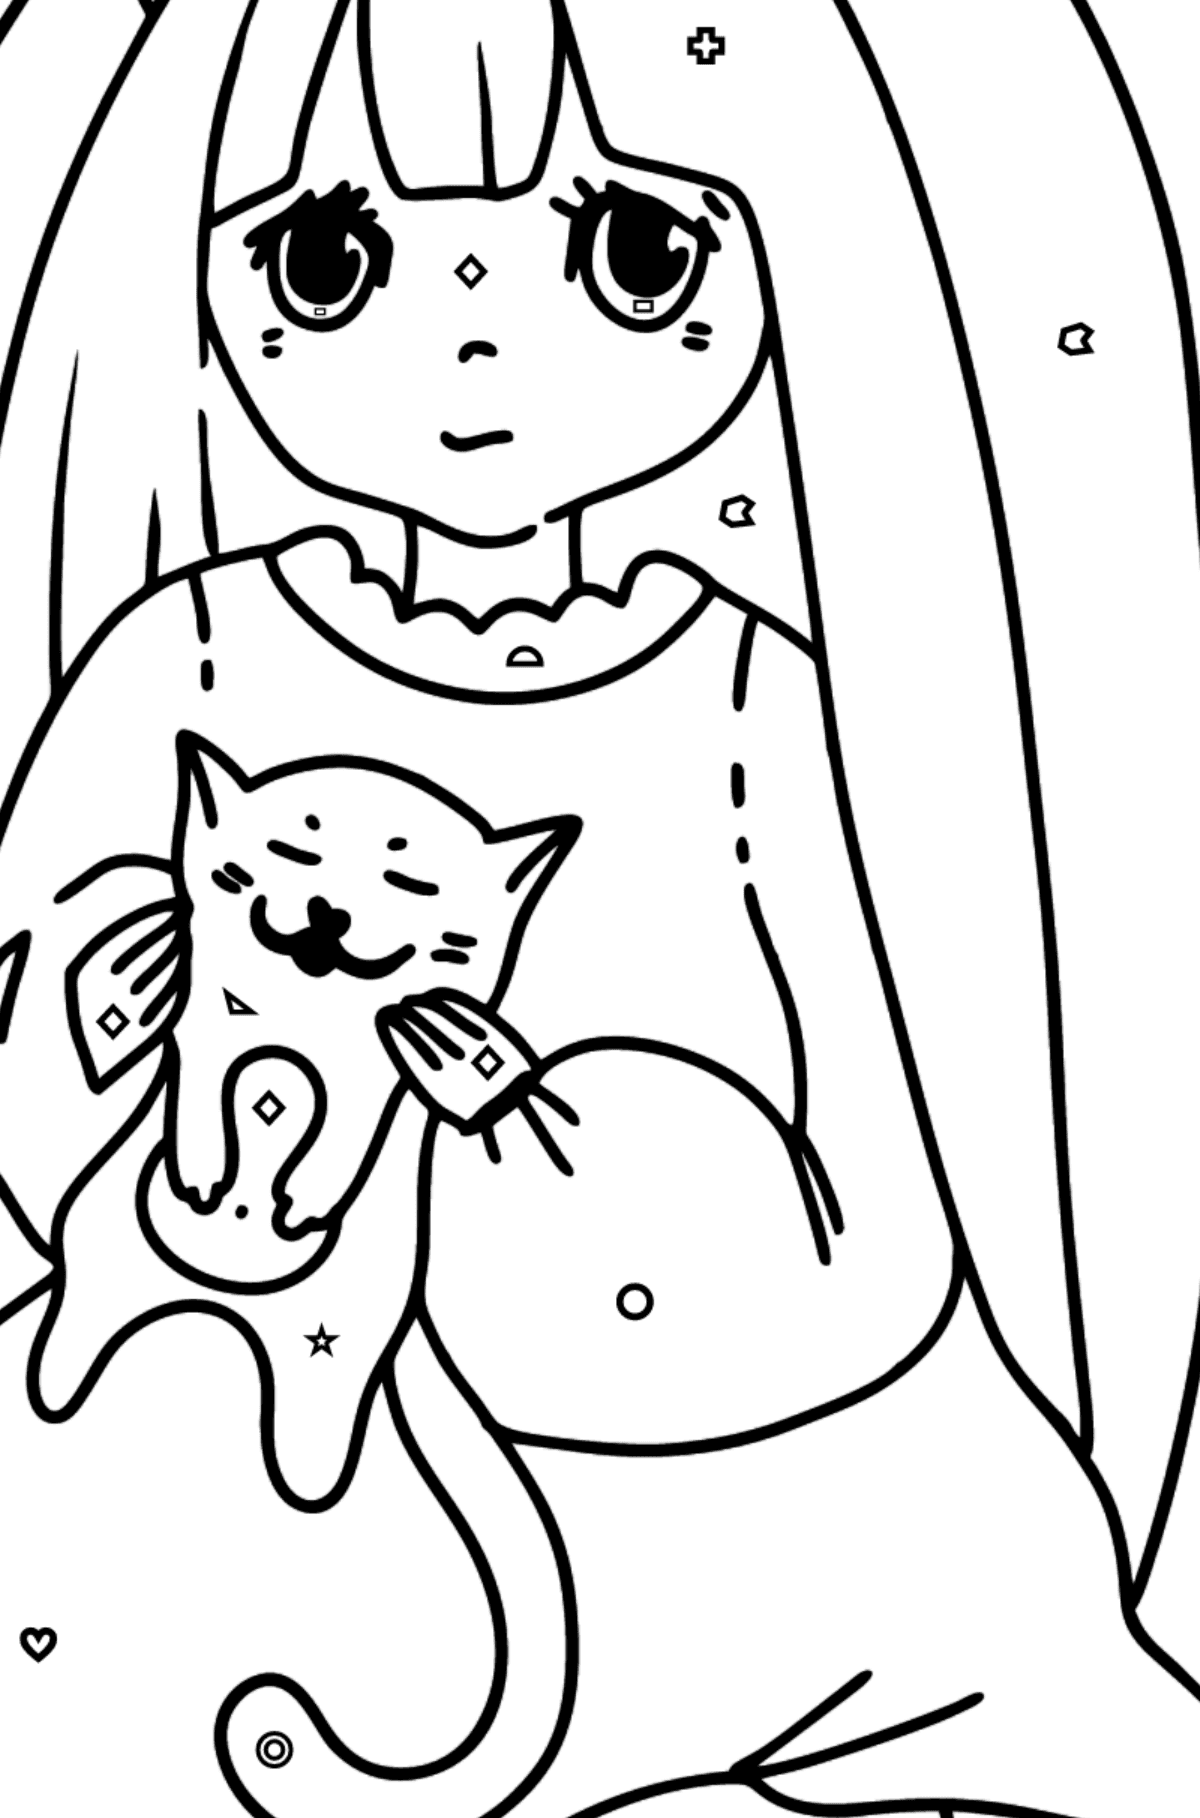 Anime Girl Playing with Kitten coloring page - Coloring by Geometric Shapes for Kids